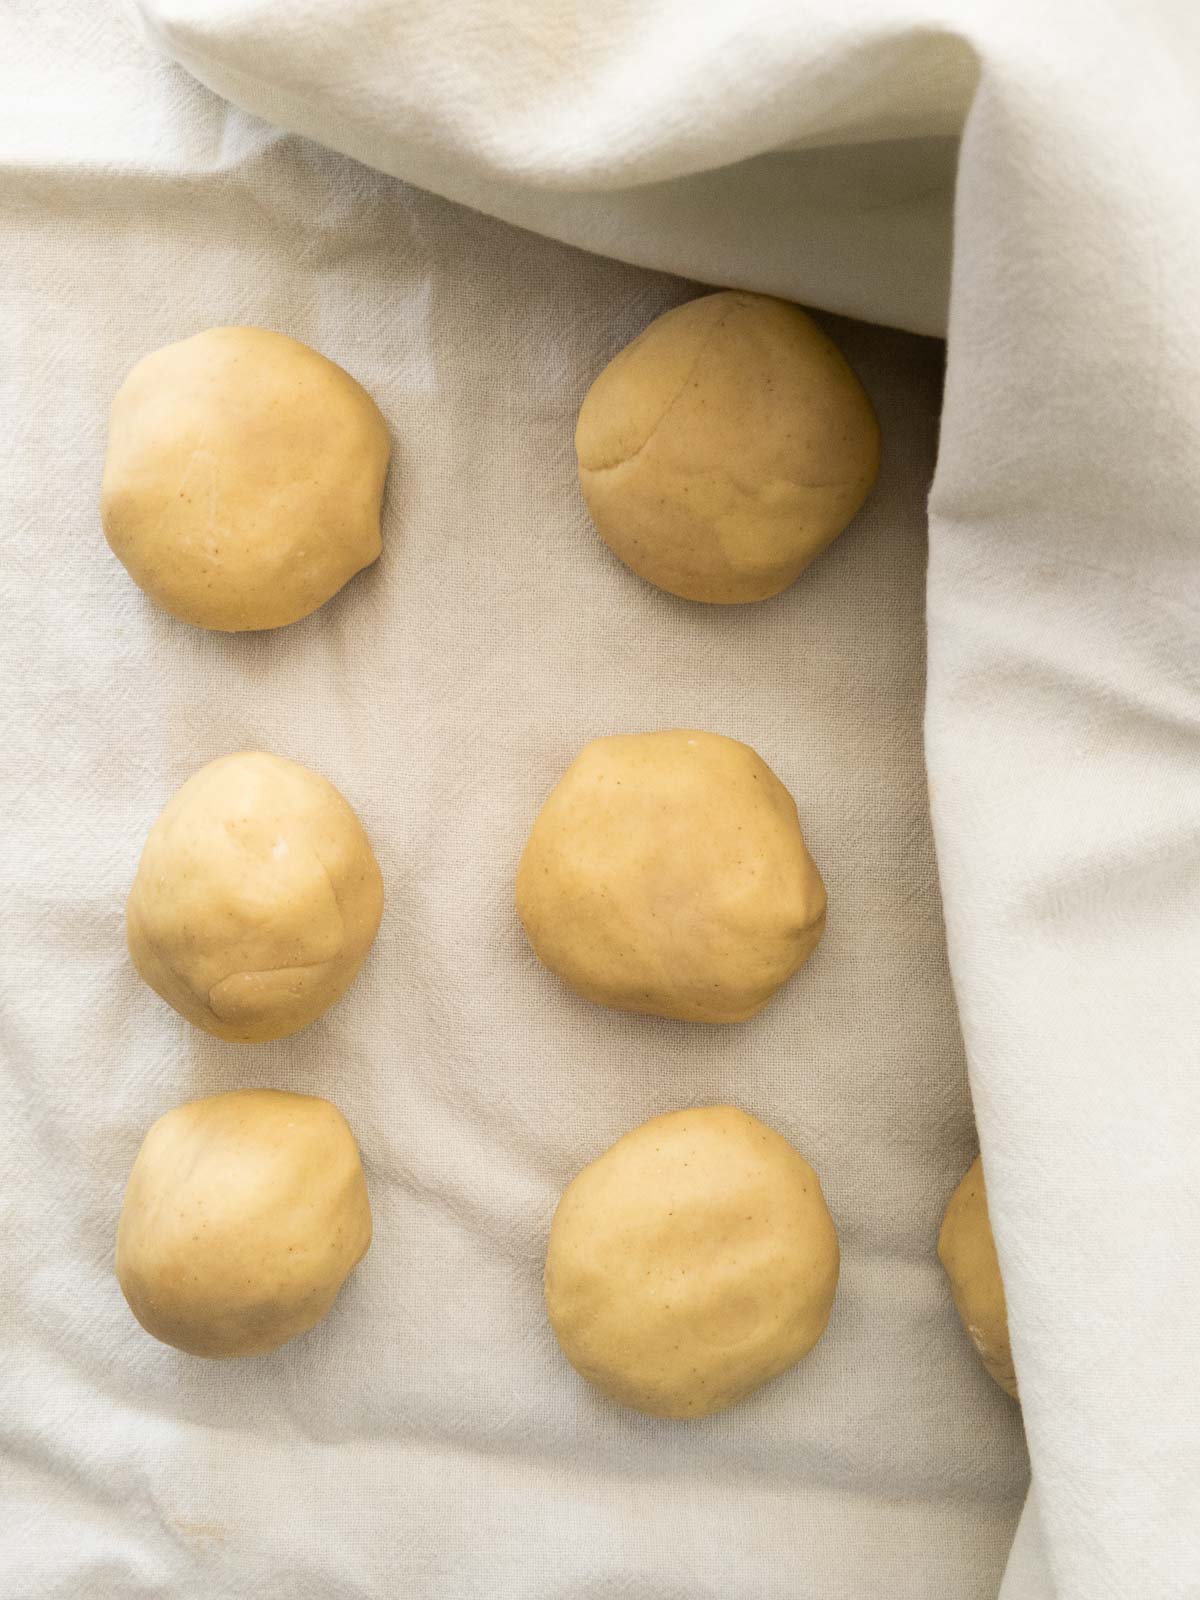 gluten free flatvread dough divided into equal peices